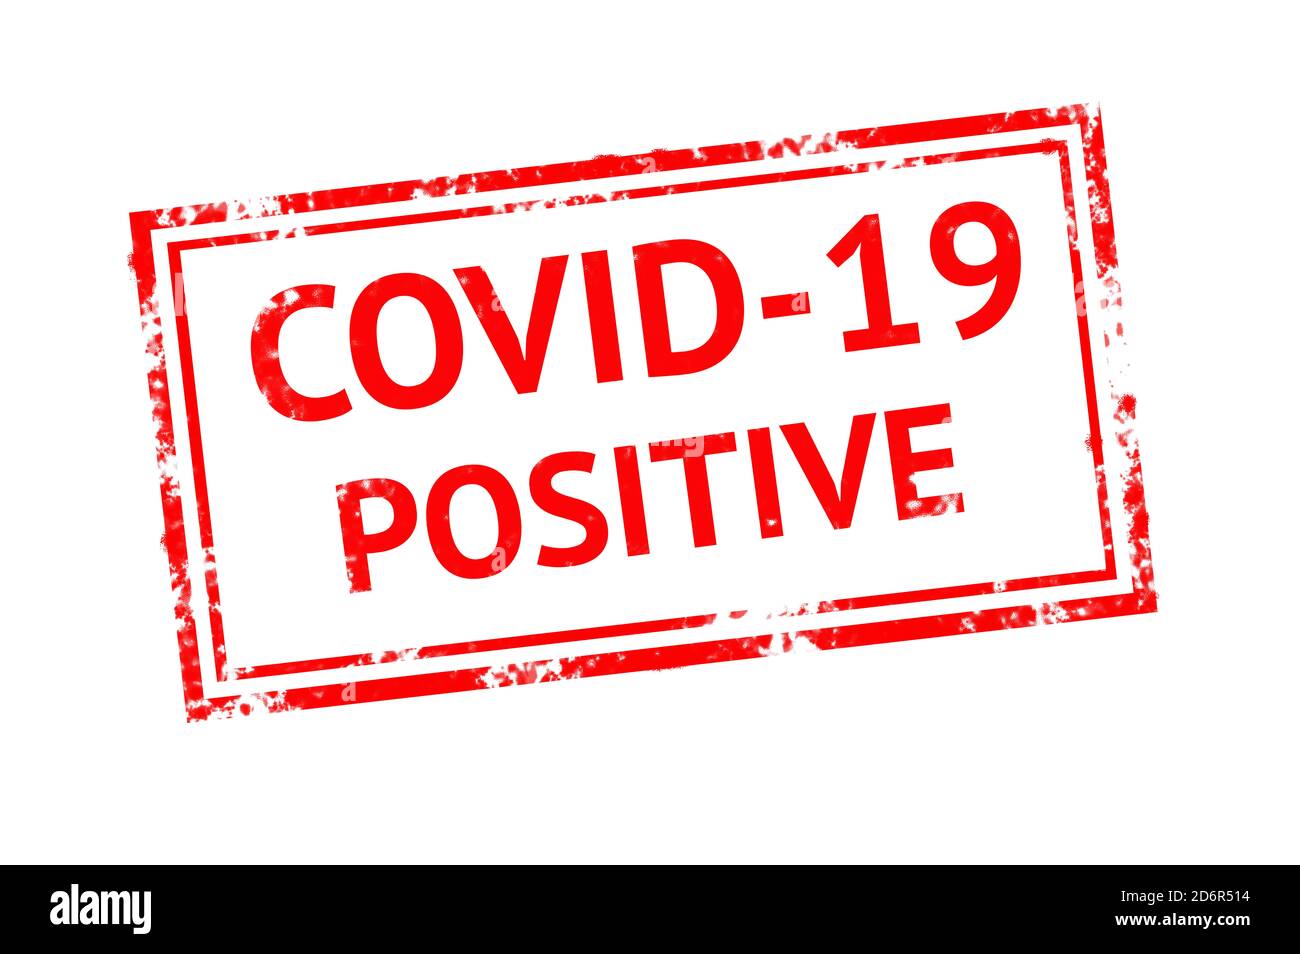 COVID-19 POSITIVE text by red rubber stamp, concept picture Stock Photo